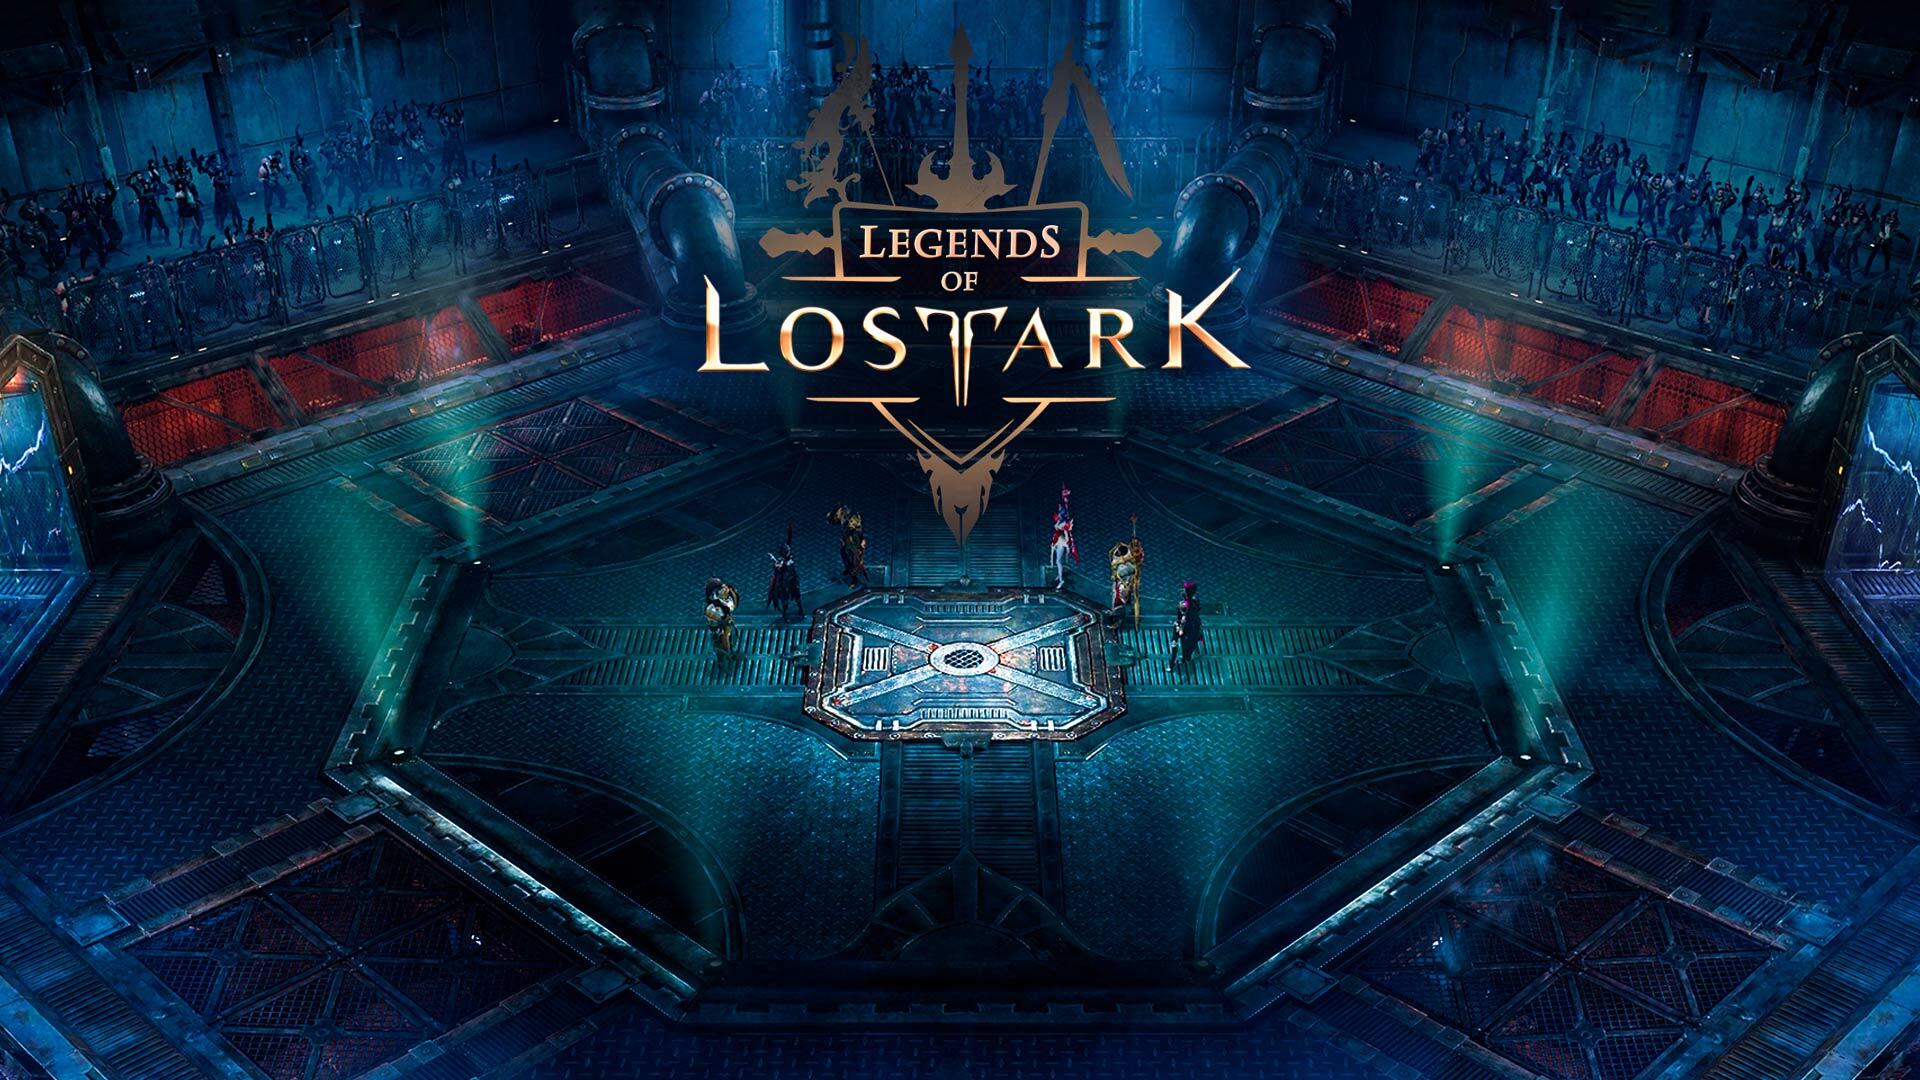 The banner for the Legends of Lost Ark Twitch Drop series, showing six Lost Ark characters standing in the middle of a dimly-lit arena.